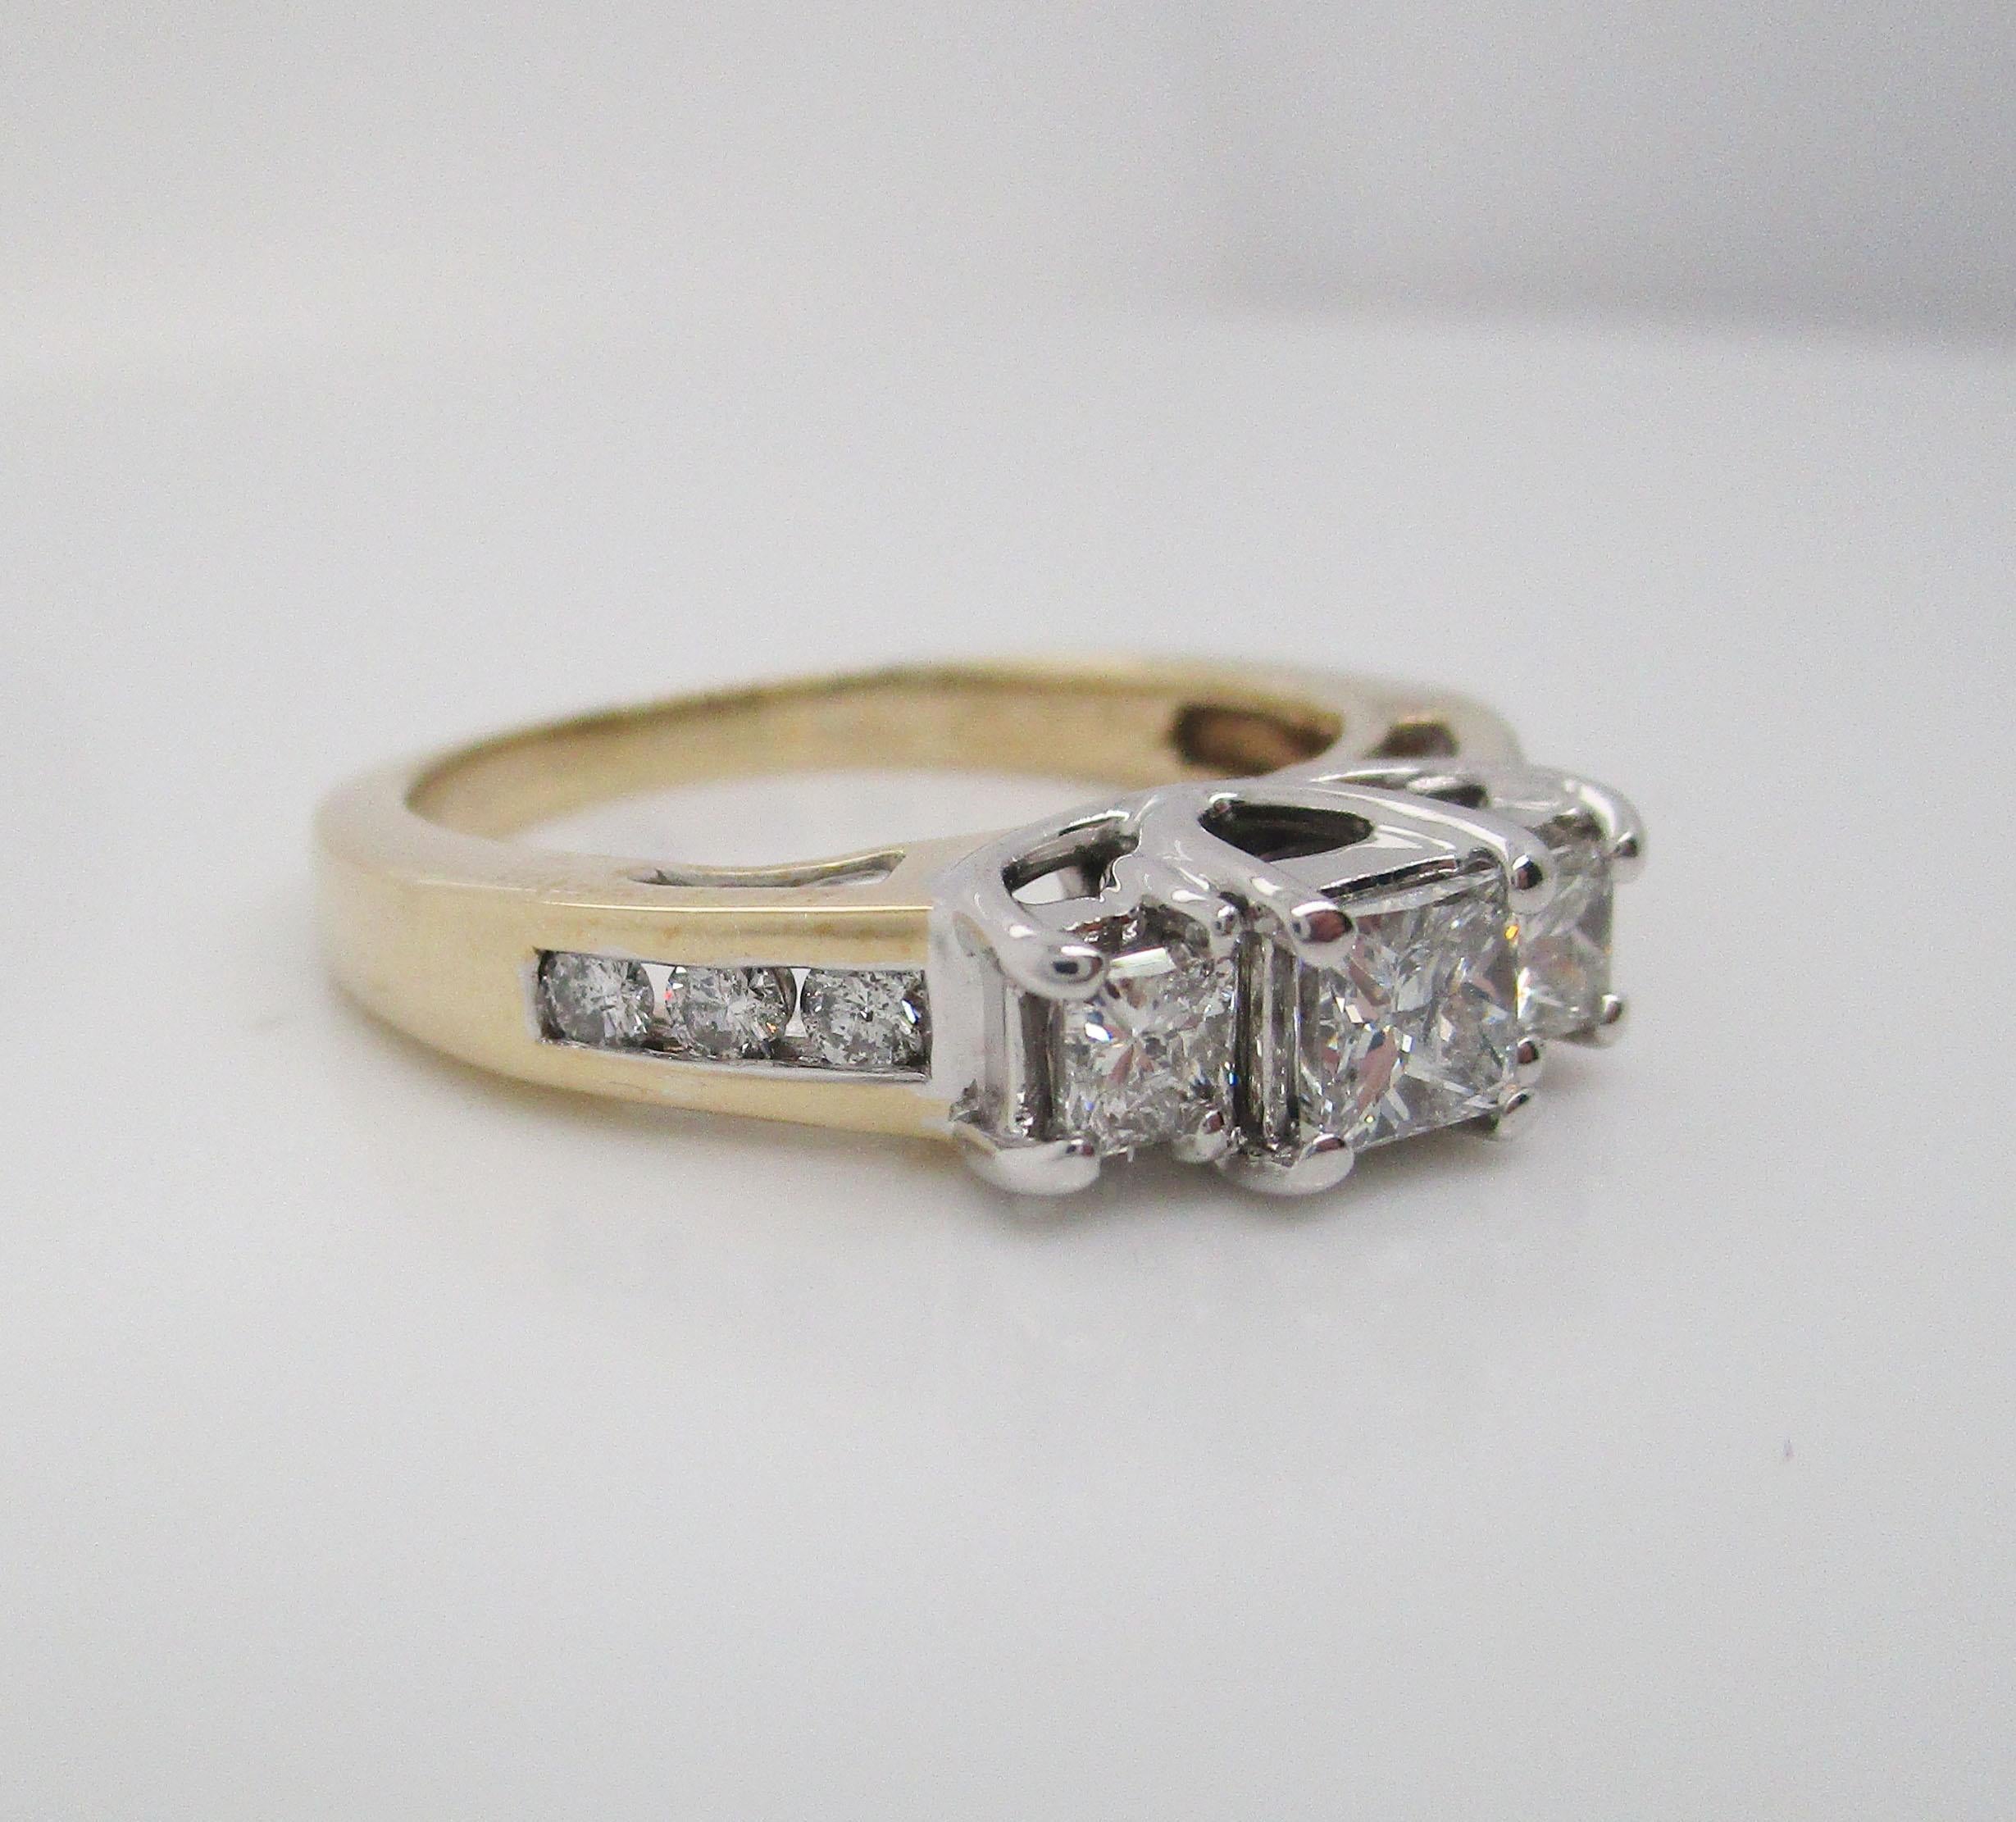 This is a beautiful diamond engagement ring in 14k yellow and white gold featuring three gorgeous princess cut diamonds! The ring is in 14k yellow gold, while the head is in 14k white gold and serves as the perfect complementary background to the